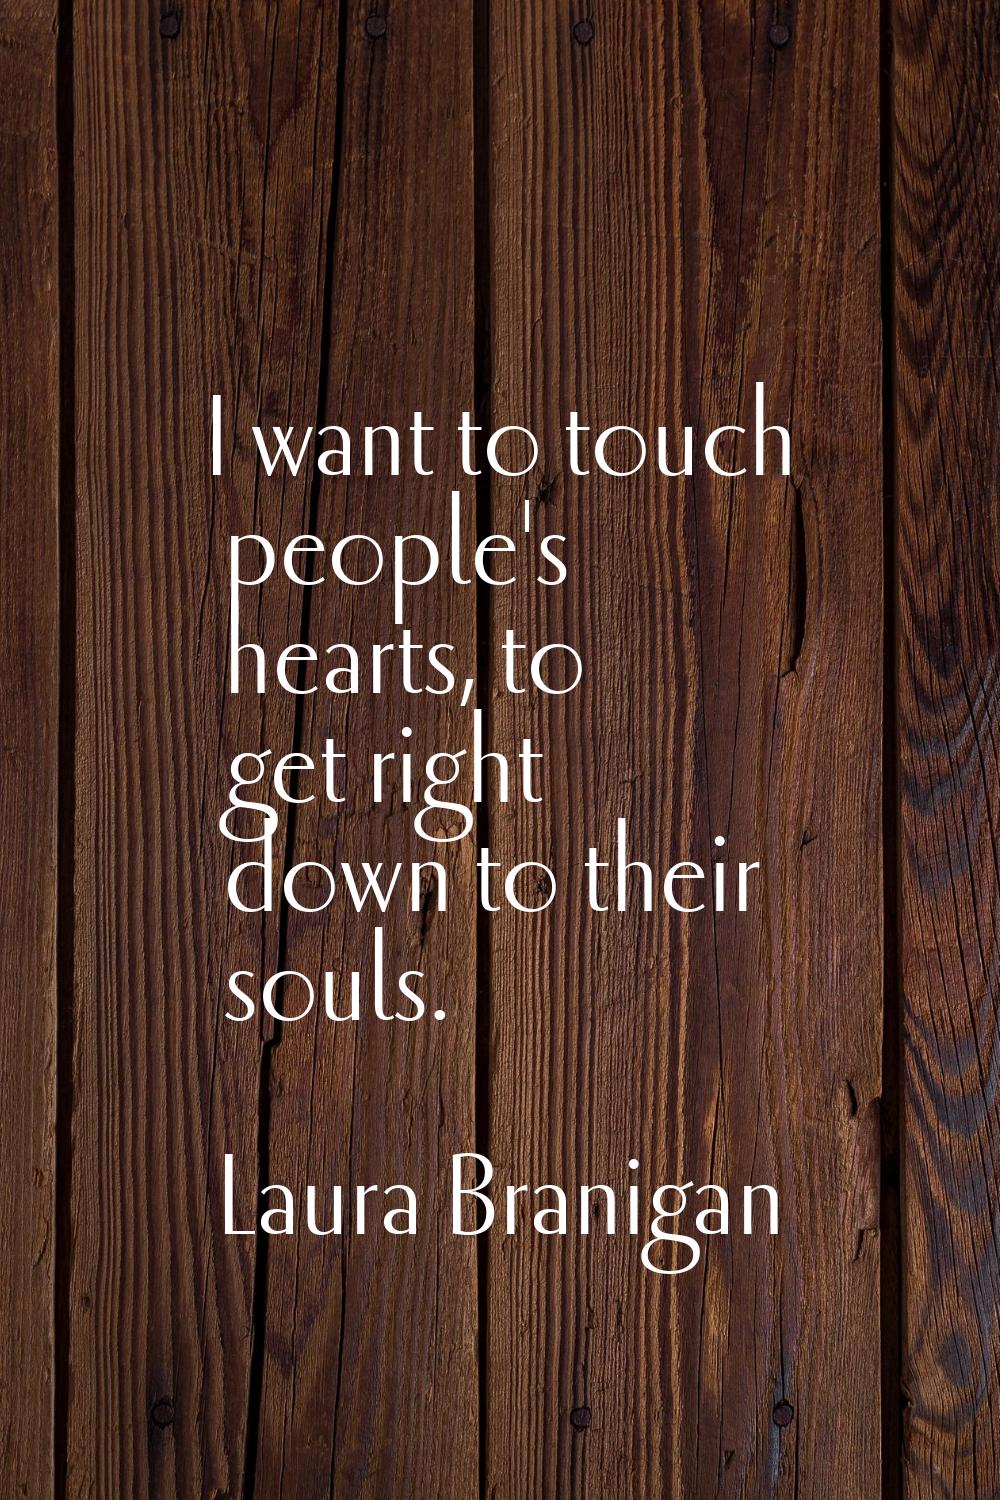 I want to touch people's hearts, to get right down to their souls.